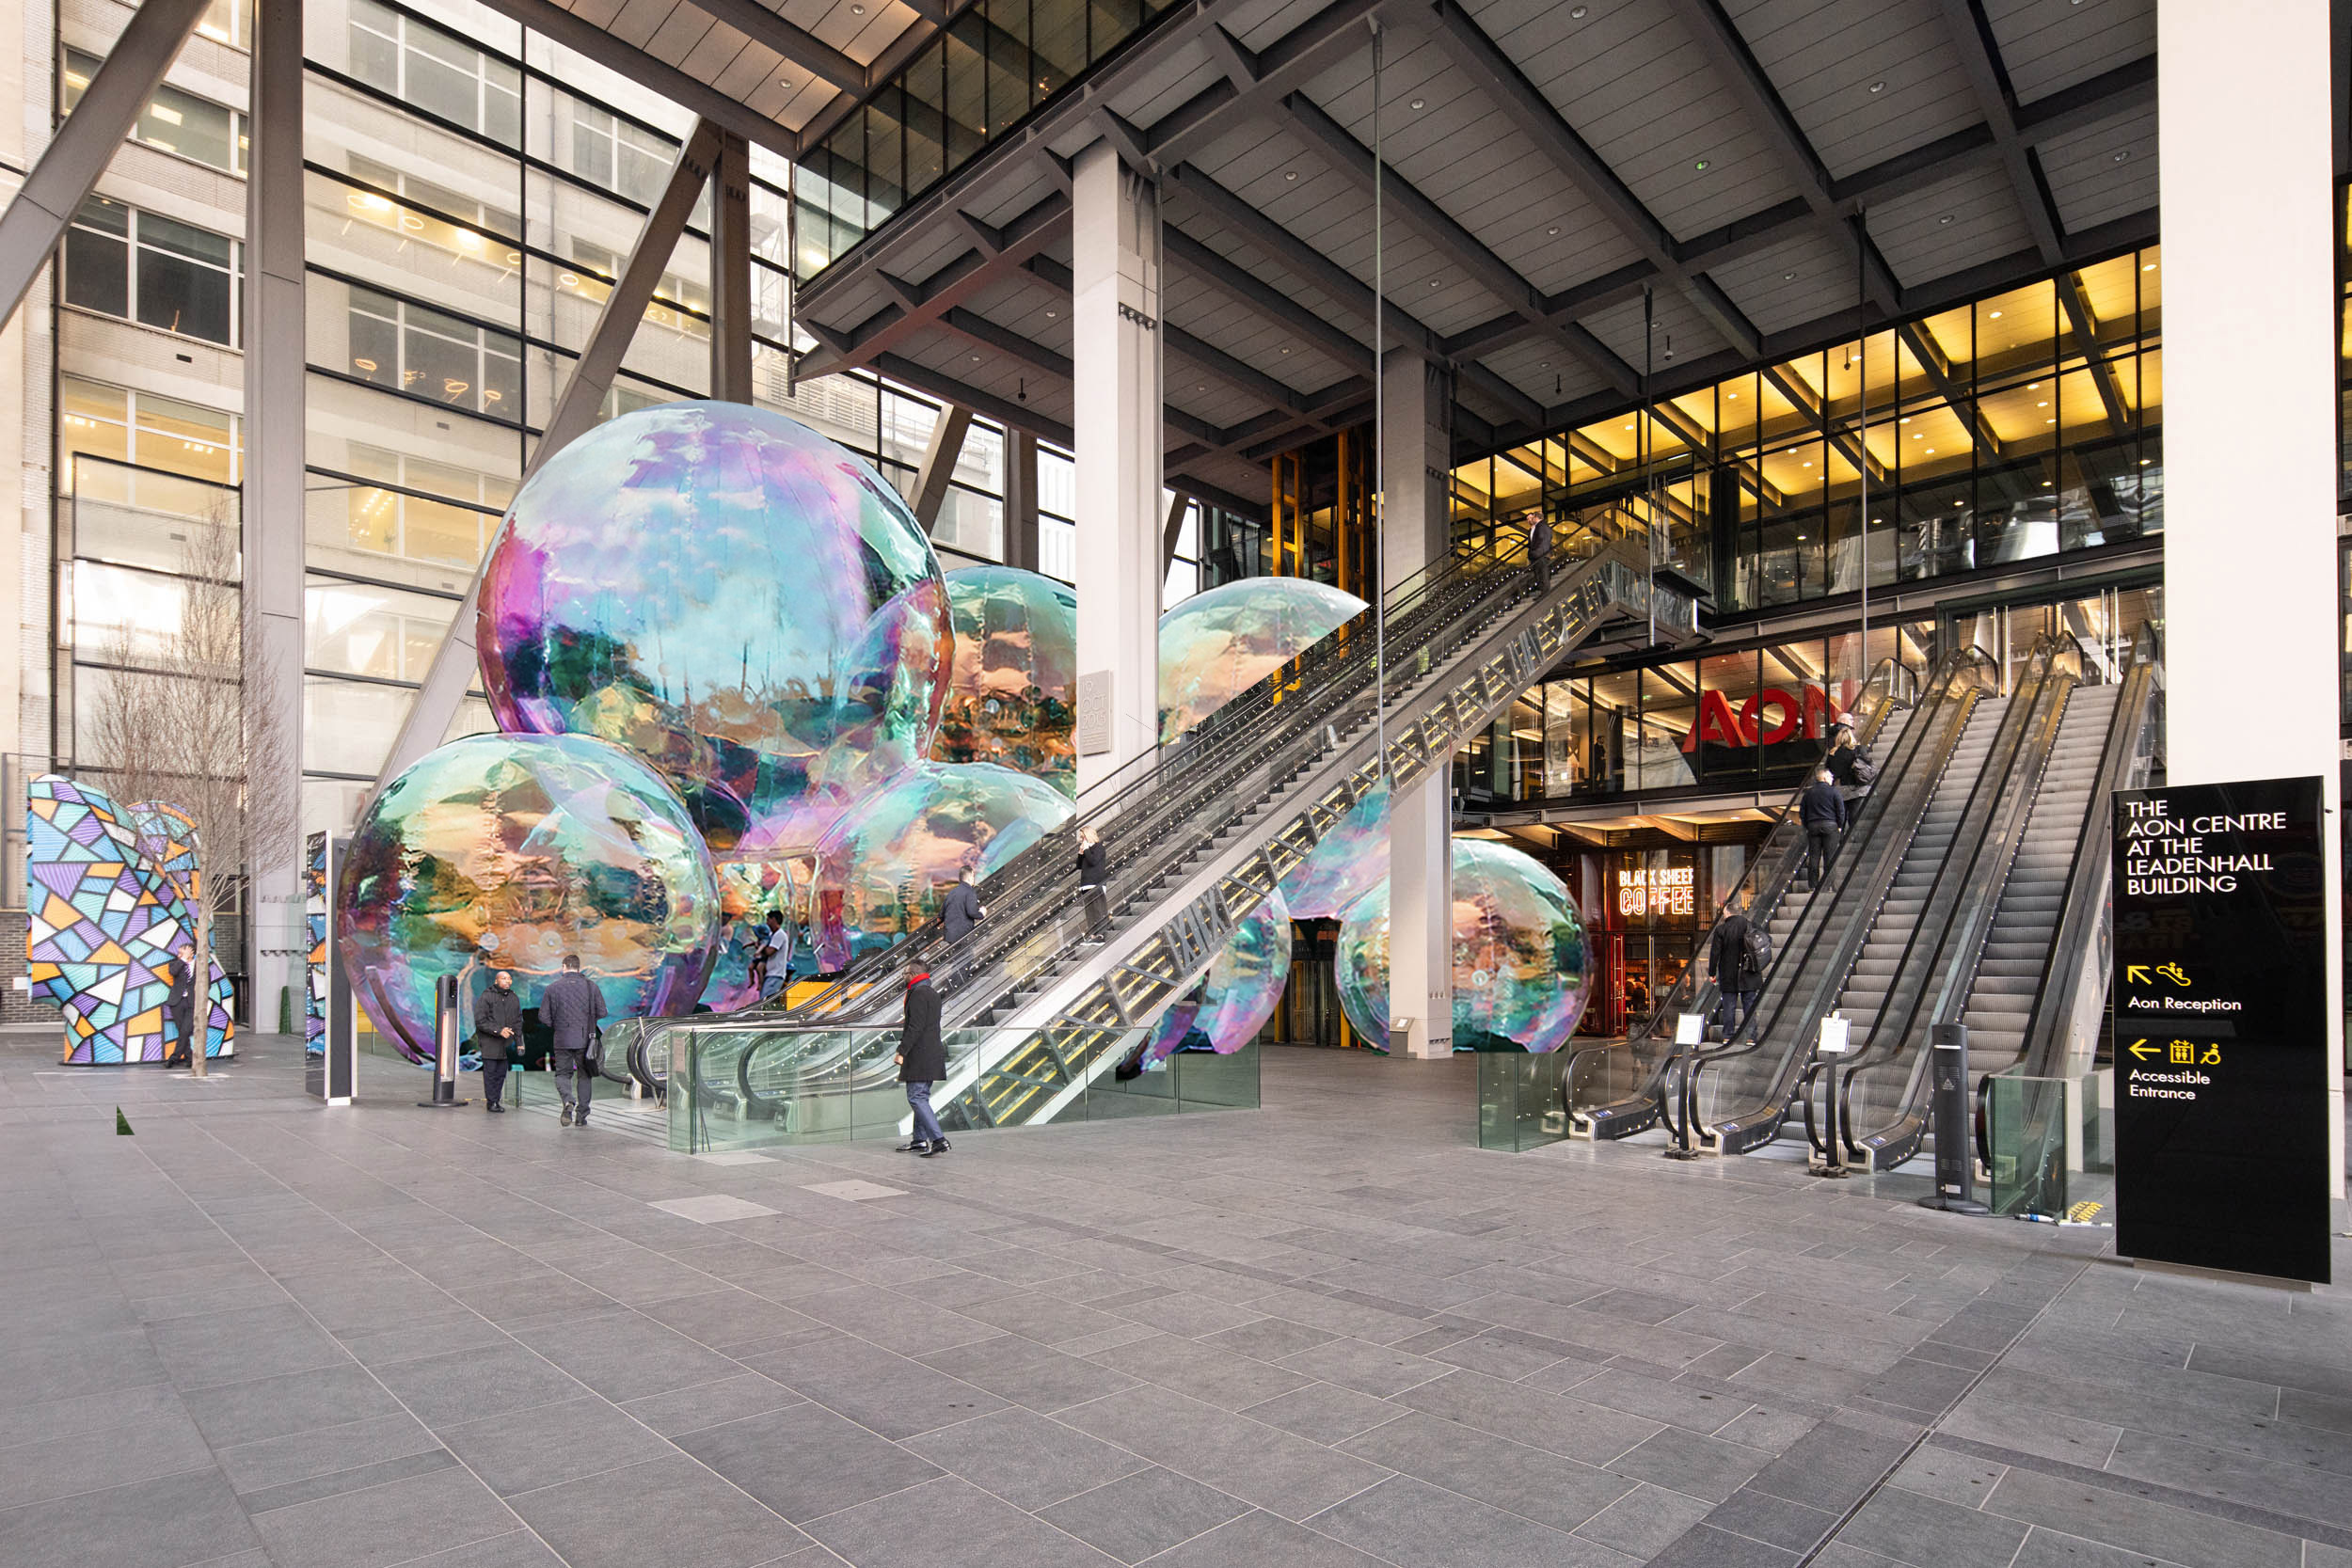 gigantic-shimmering-bubbles-will-be-appearing-across-the-city-this-week